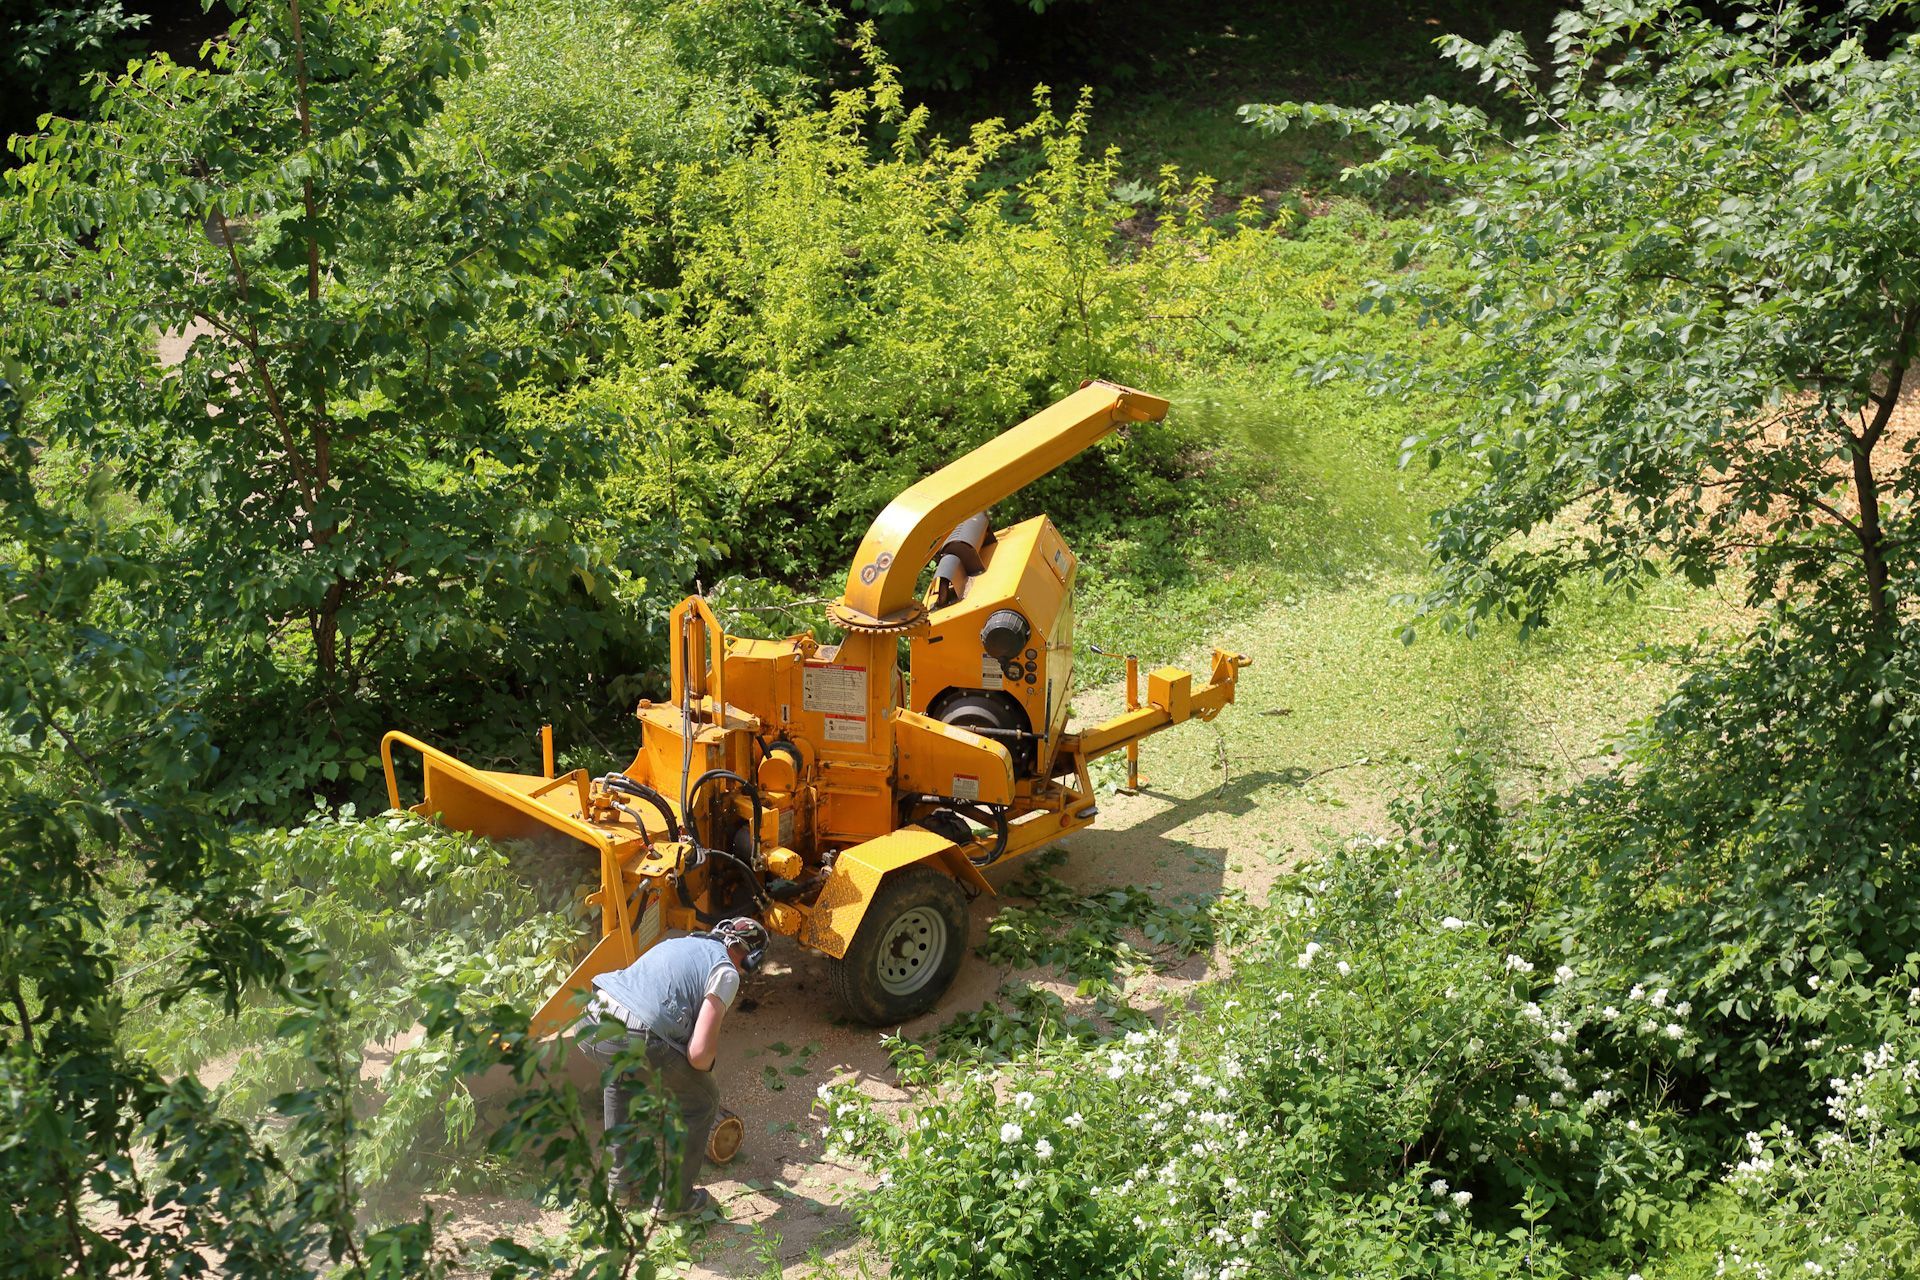 A man is working on a tree chipper in the woods